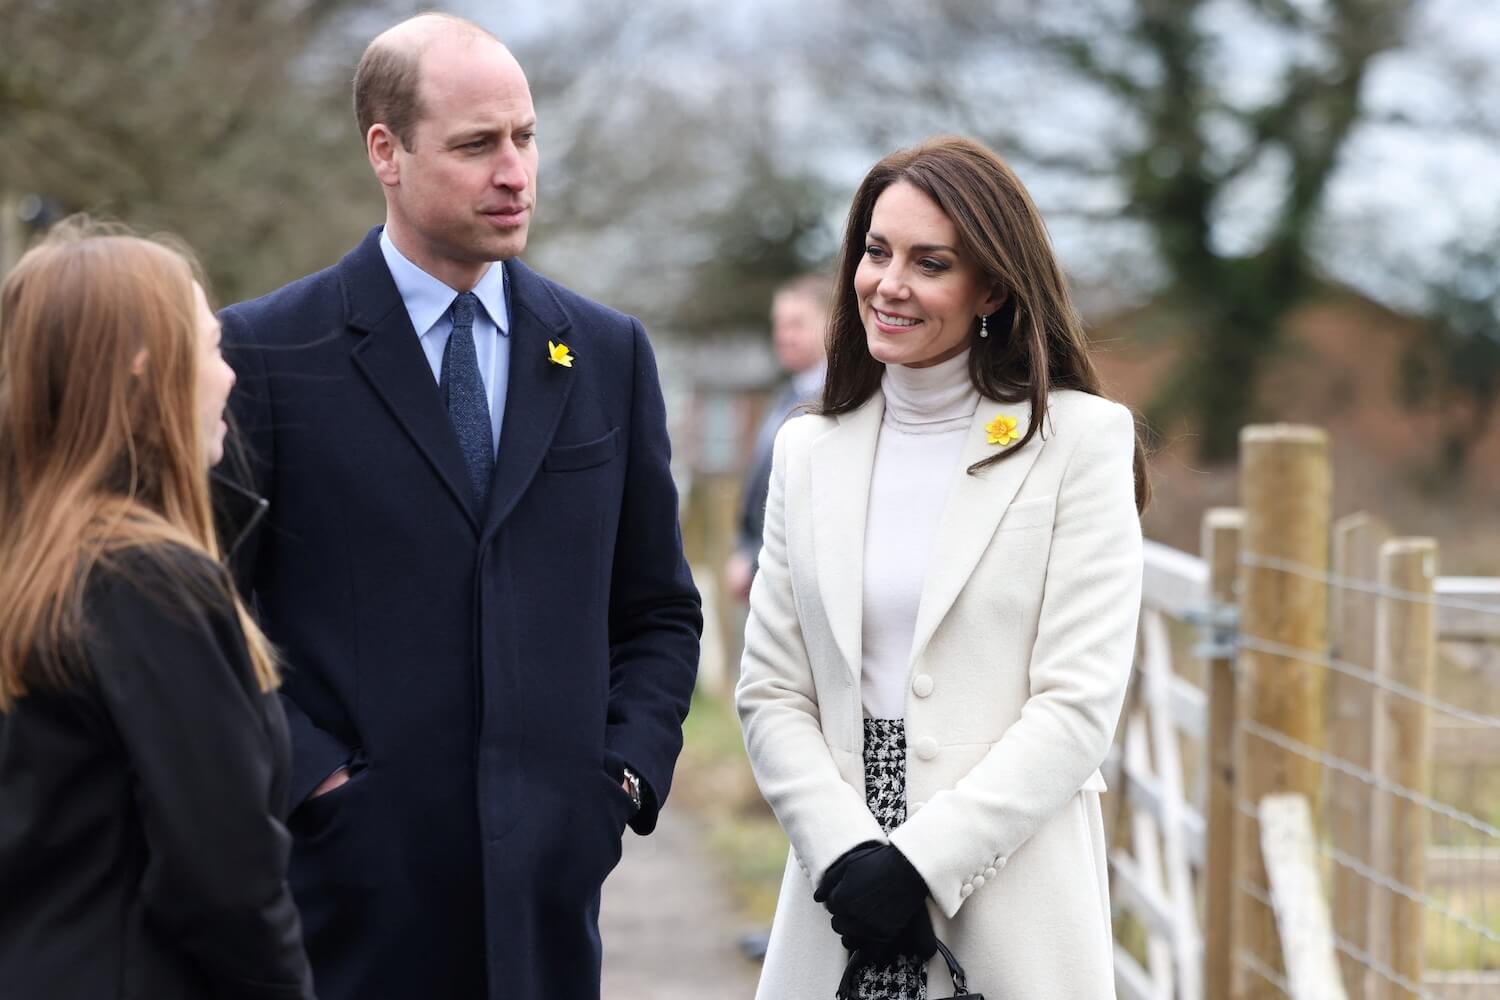 Kate Middleton and Prince William Are ‘No Longer Joined at the Hip’ During Public Appearances, Body Language Expert Says